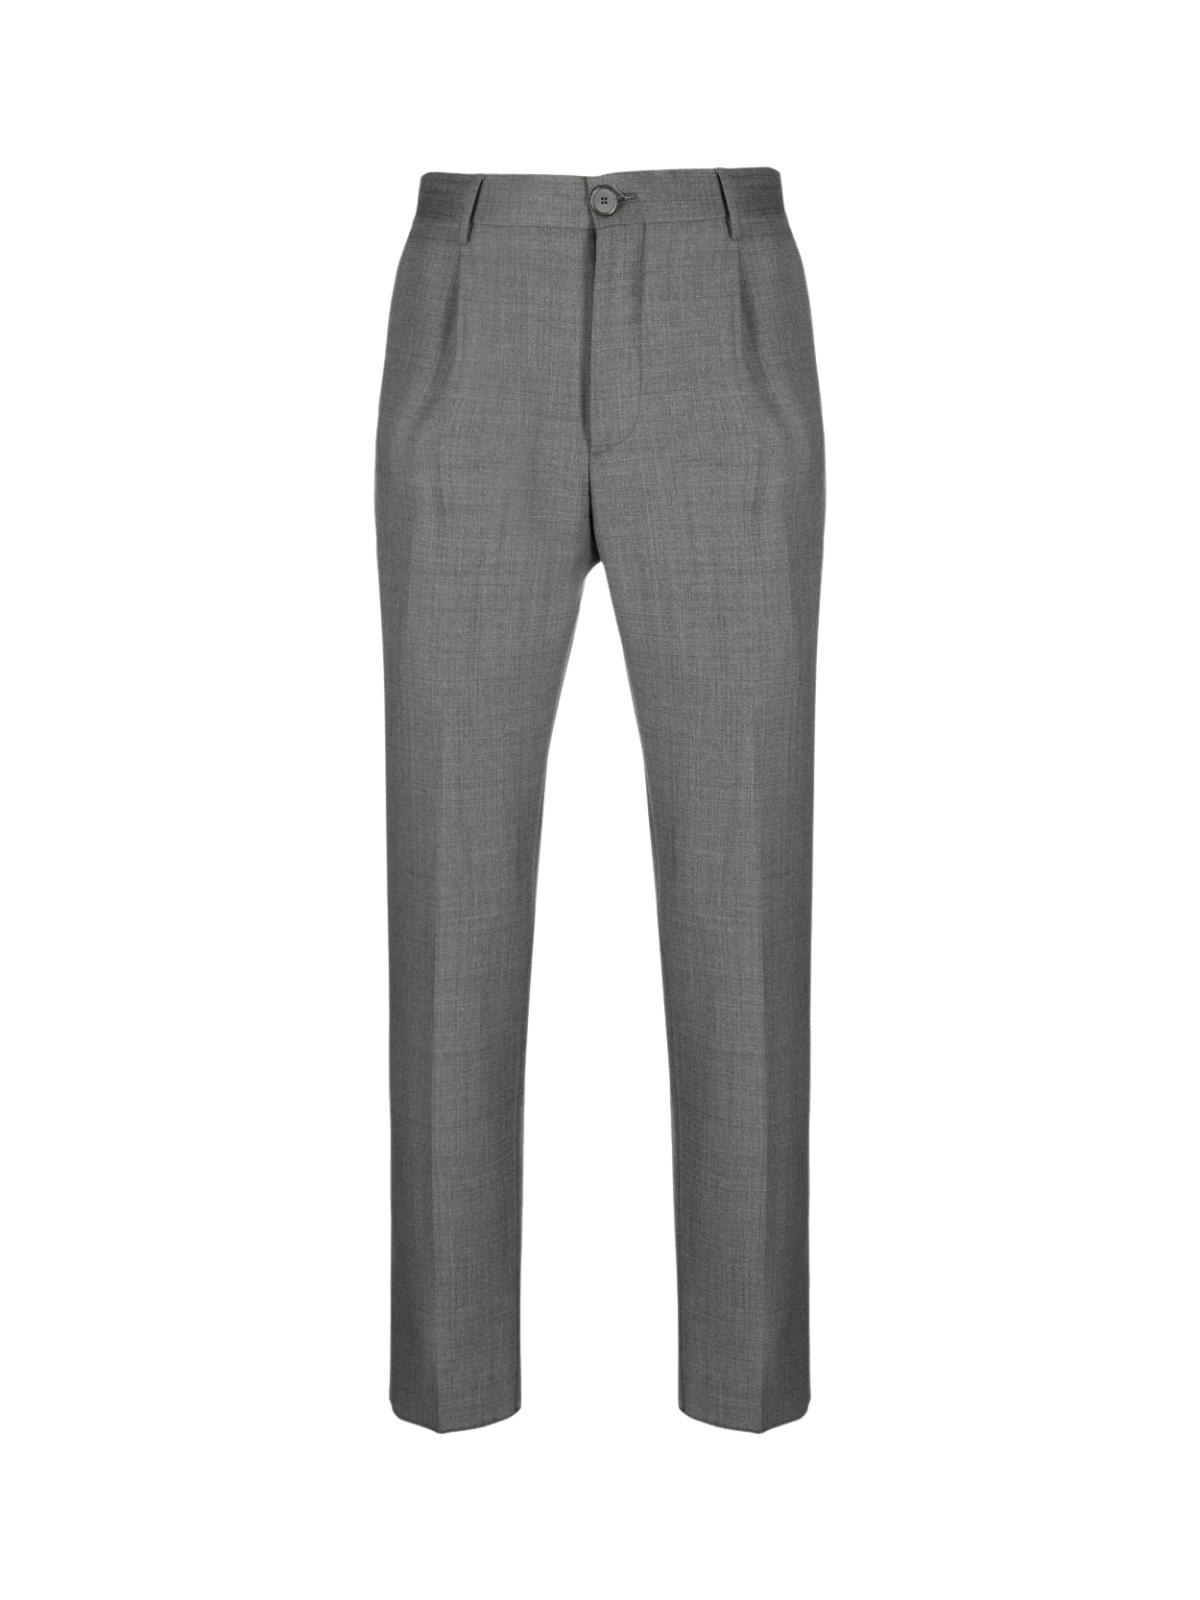 Tagliatore Trousers With One Small Pence